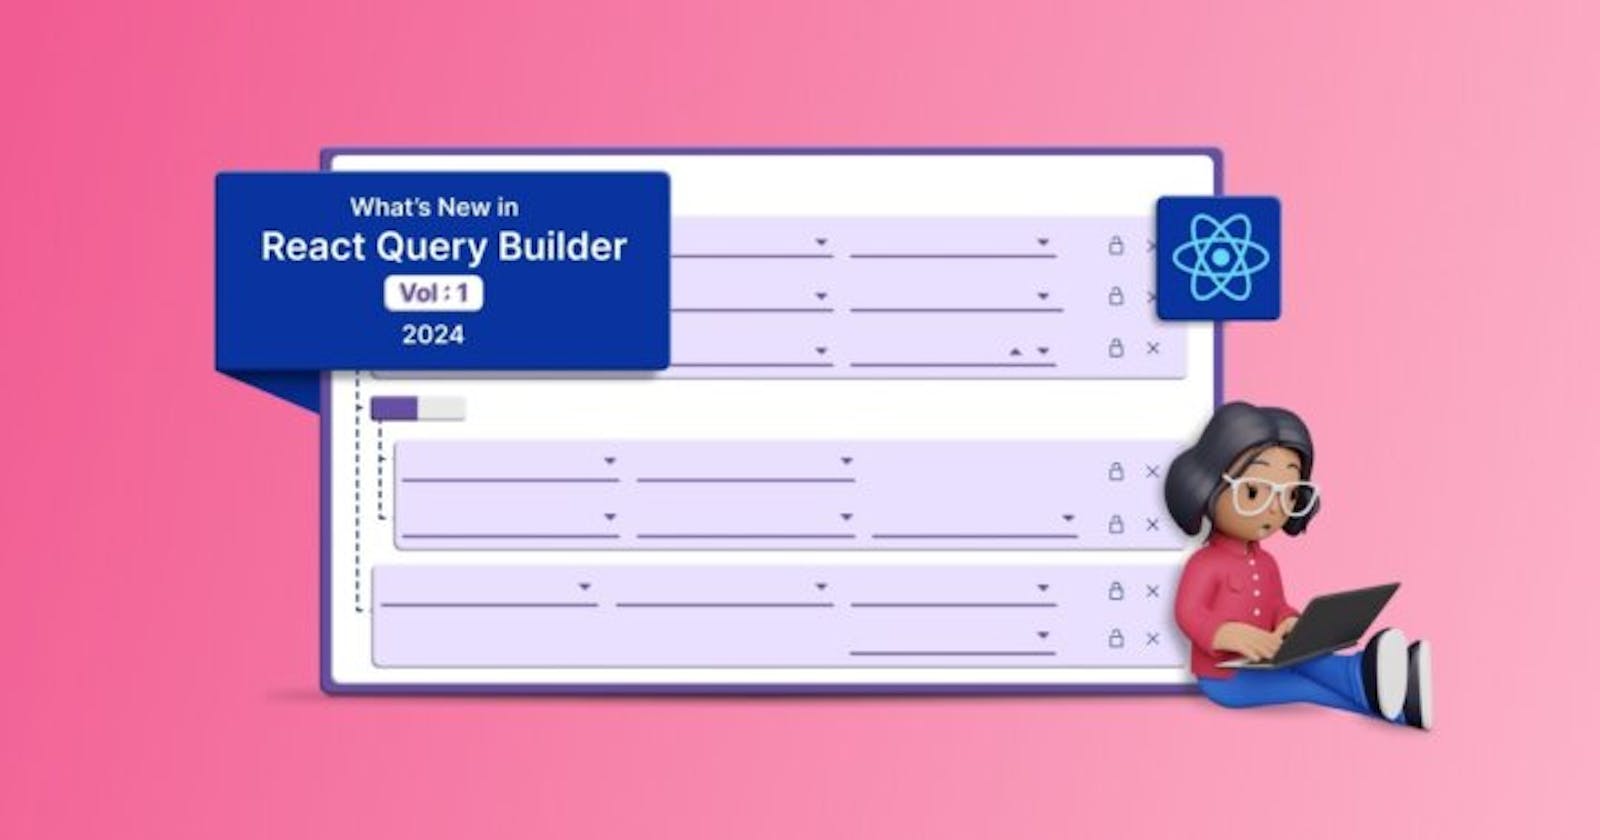 What’s New in React Query Builder: 2024 Volume 1